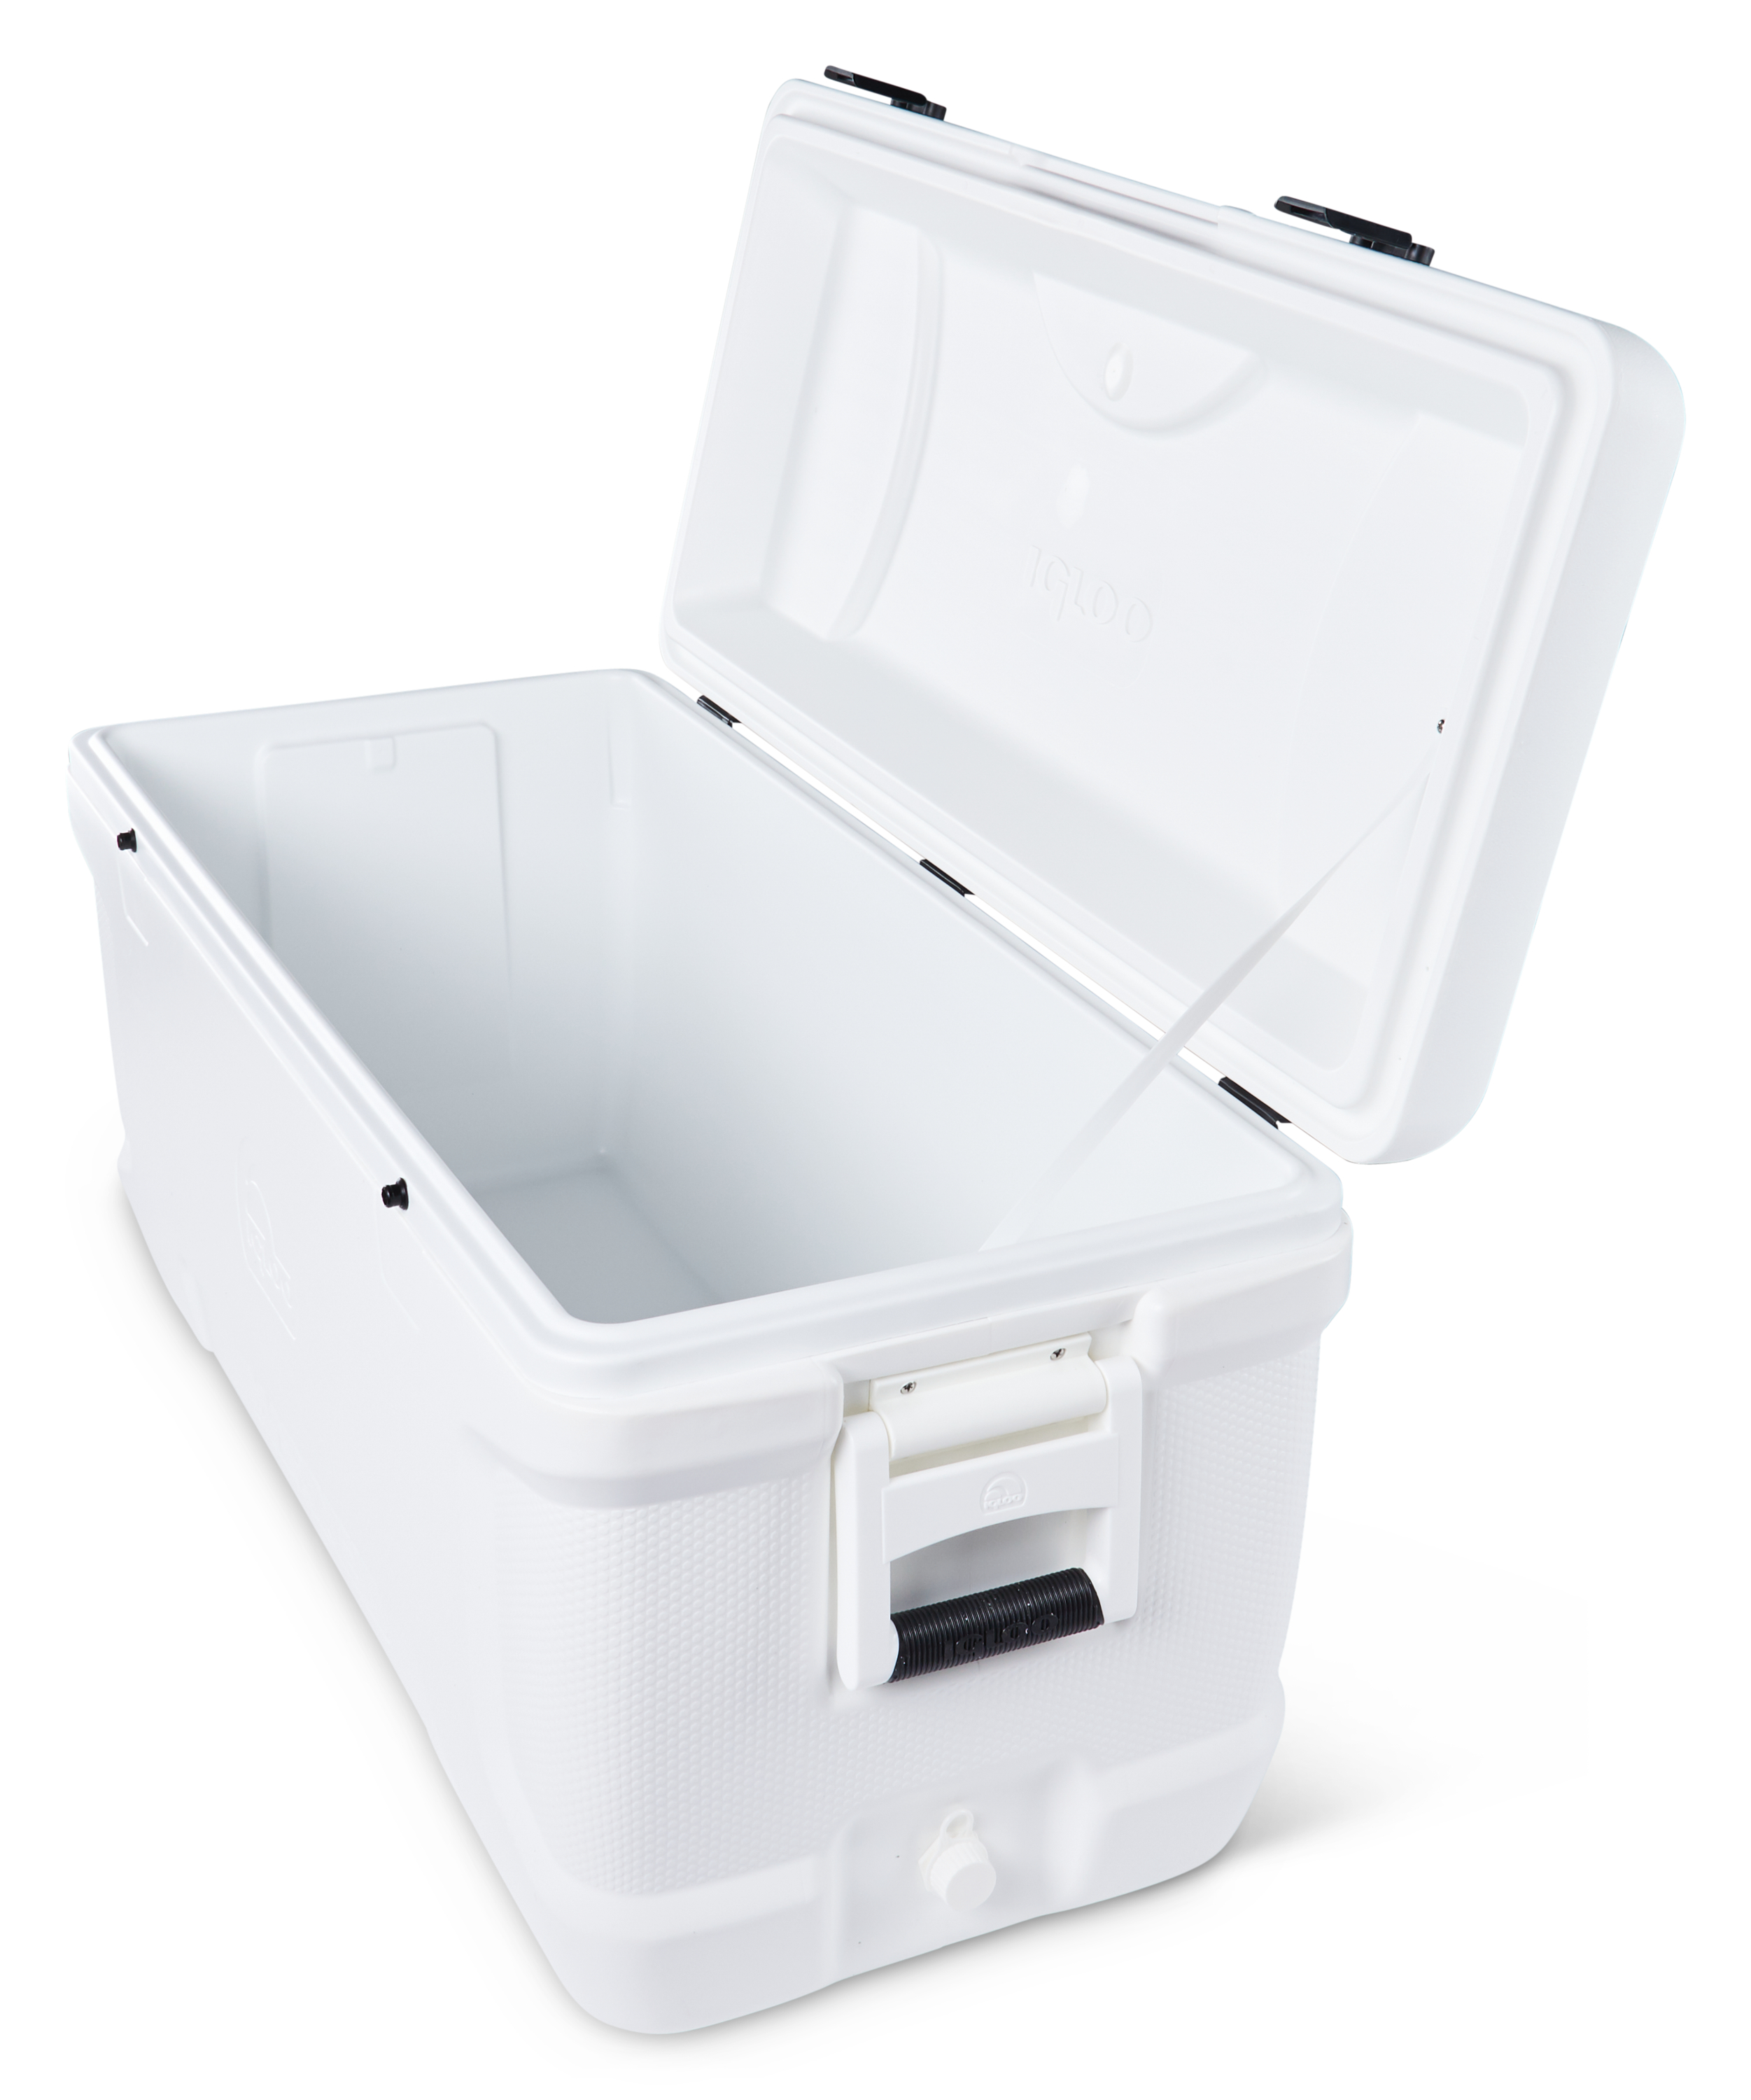 Igloo 150 Qt Marine 7-Day Cold Hard Chest Cooler, White - image 2 of 14